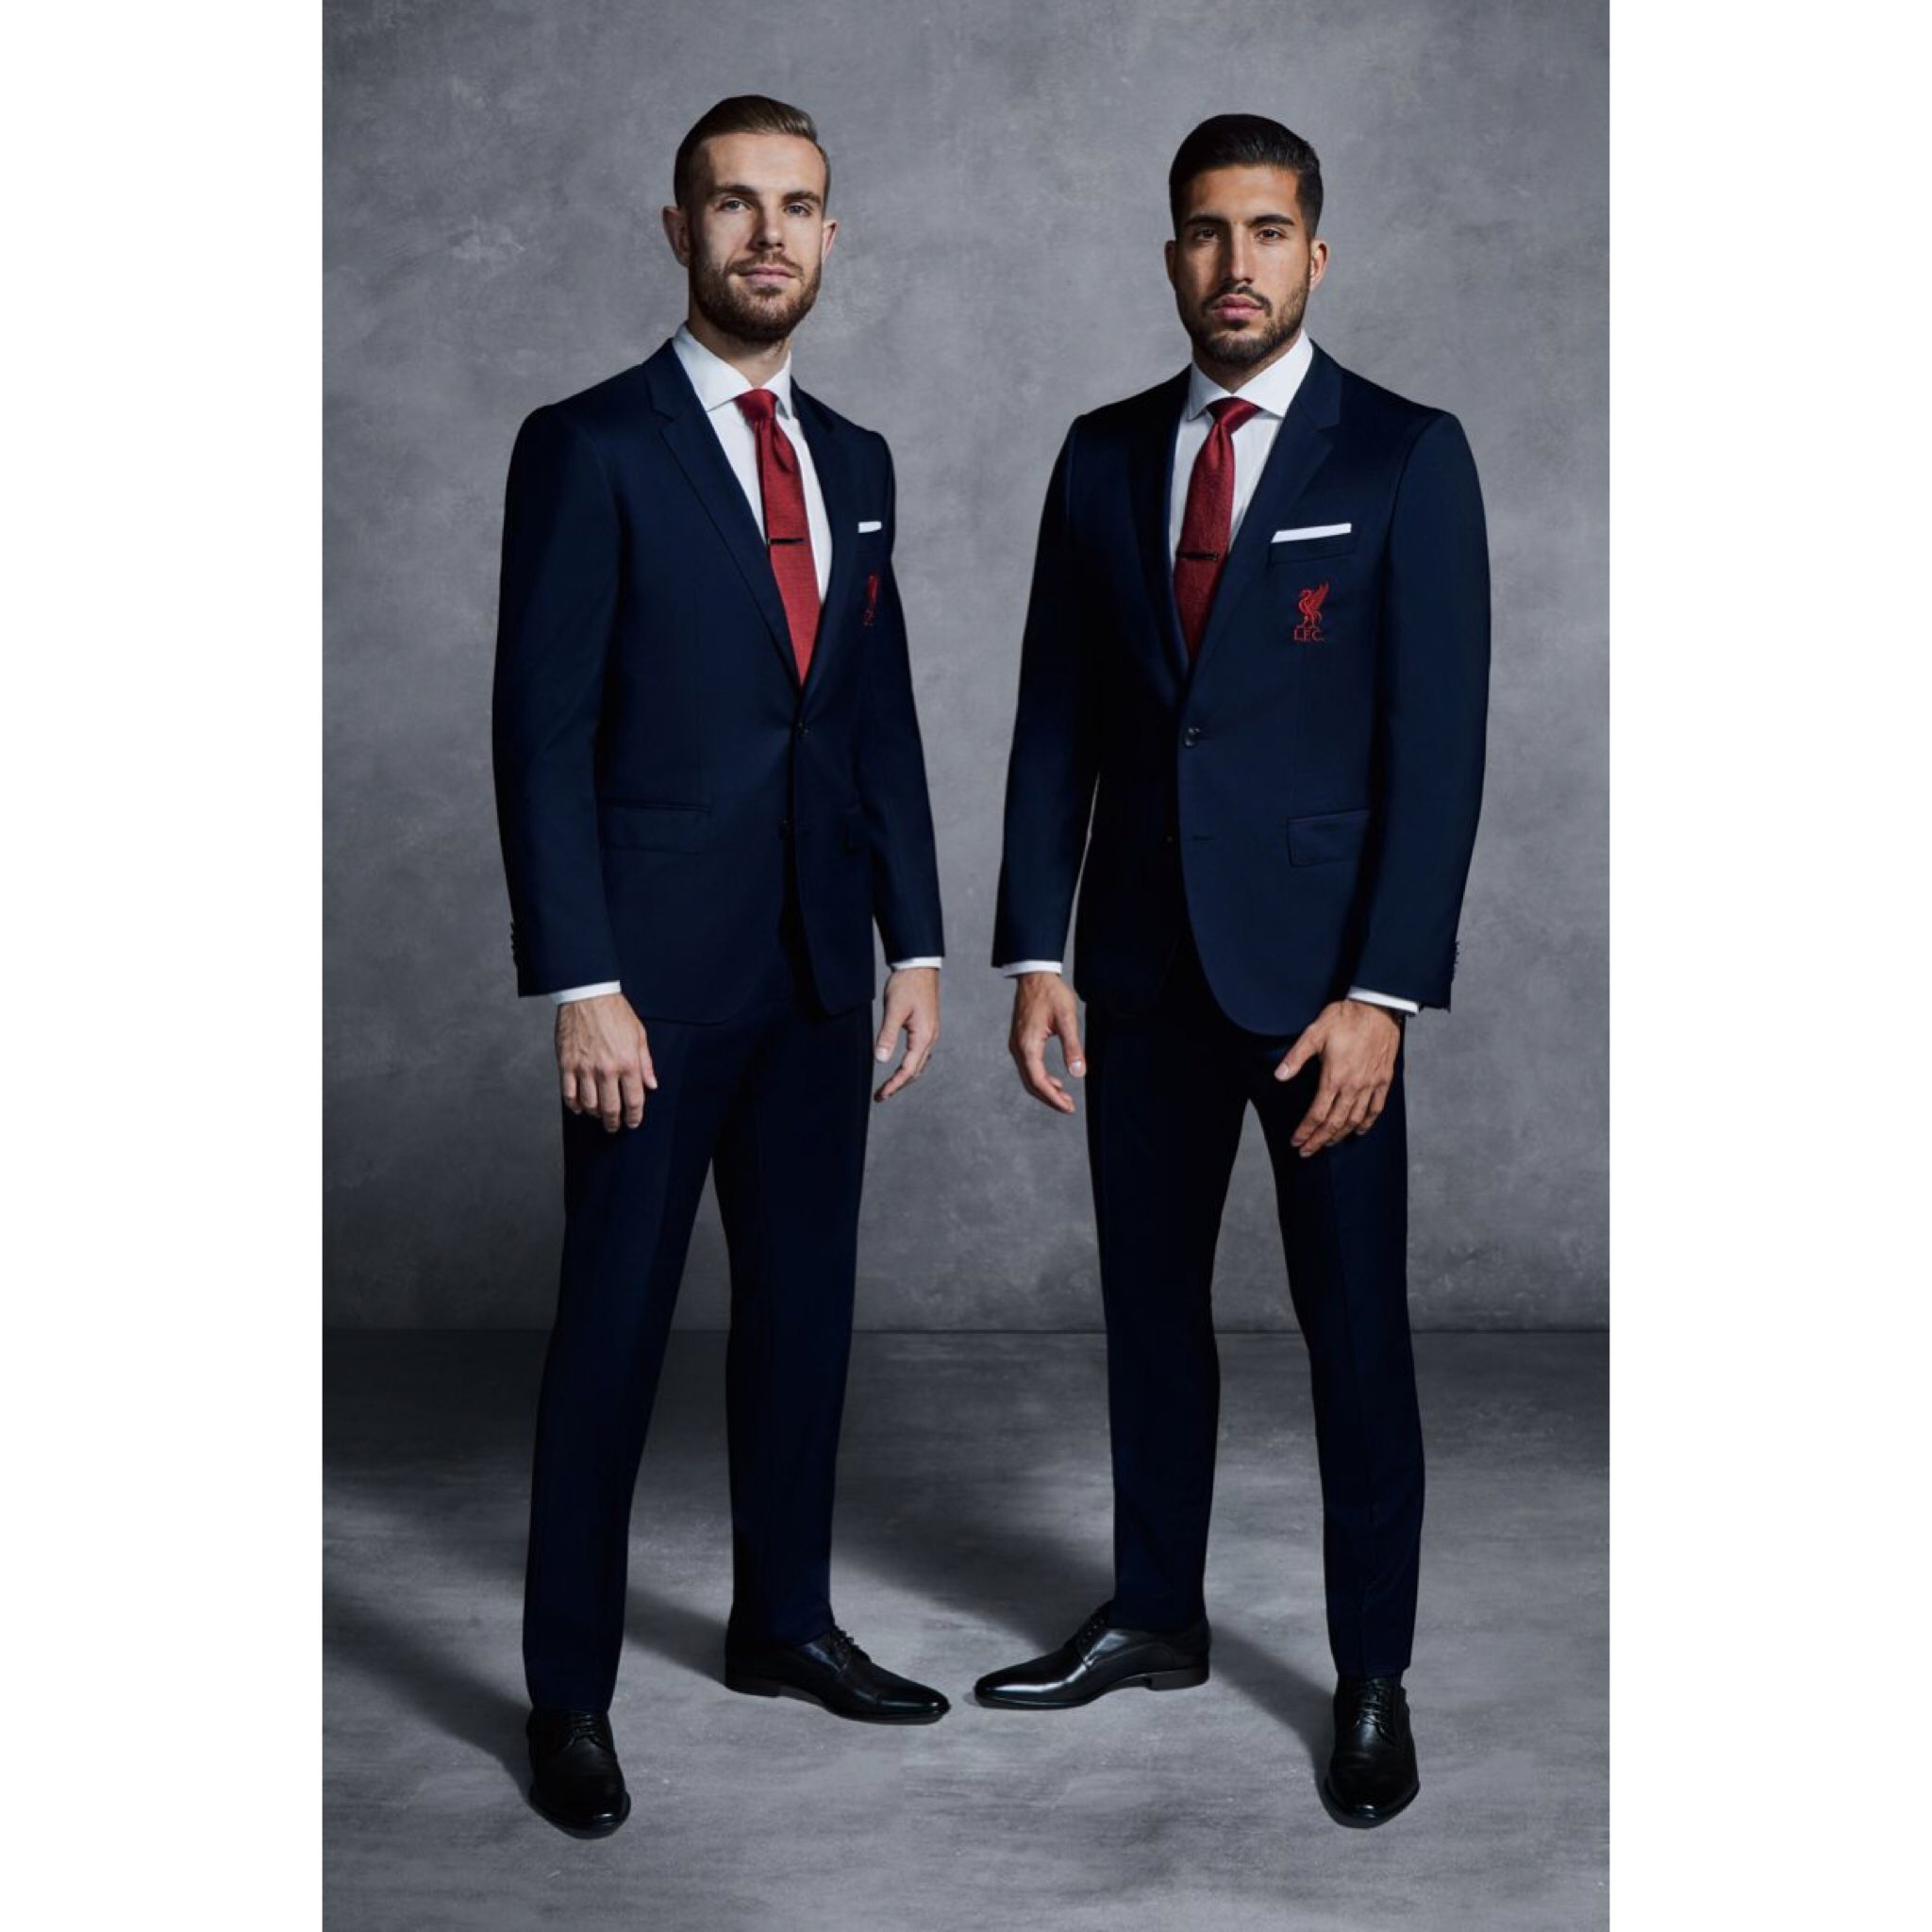 Heel downstairs Serviceable Nigel Clare on Twitter: "Liverpool FC dressed by one of our favourite  brands Hugo Boss. Available in-store with a full free alterations service.  https://t.co/pwvuYsA084" / Twitter